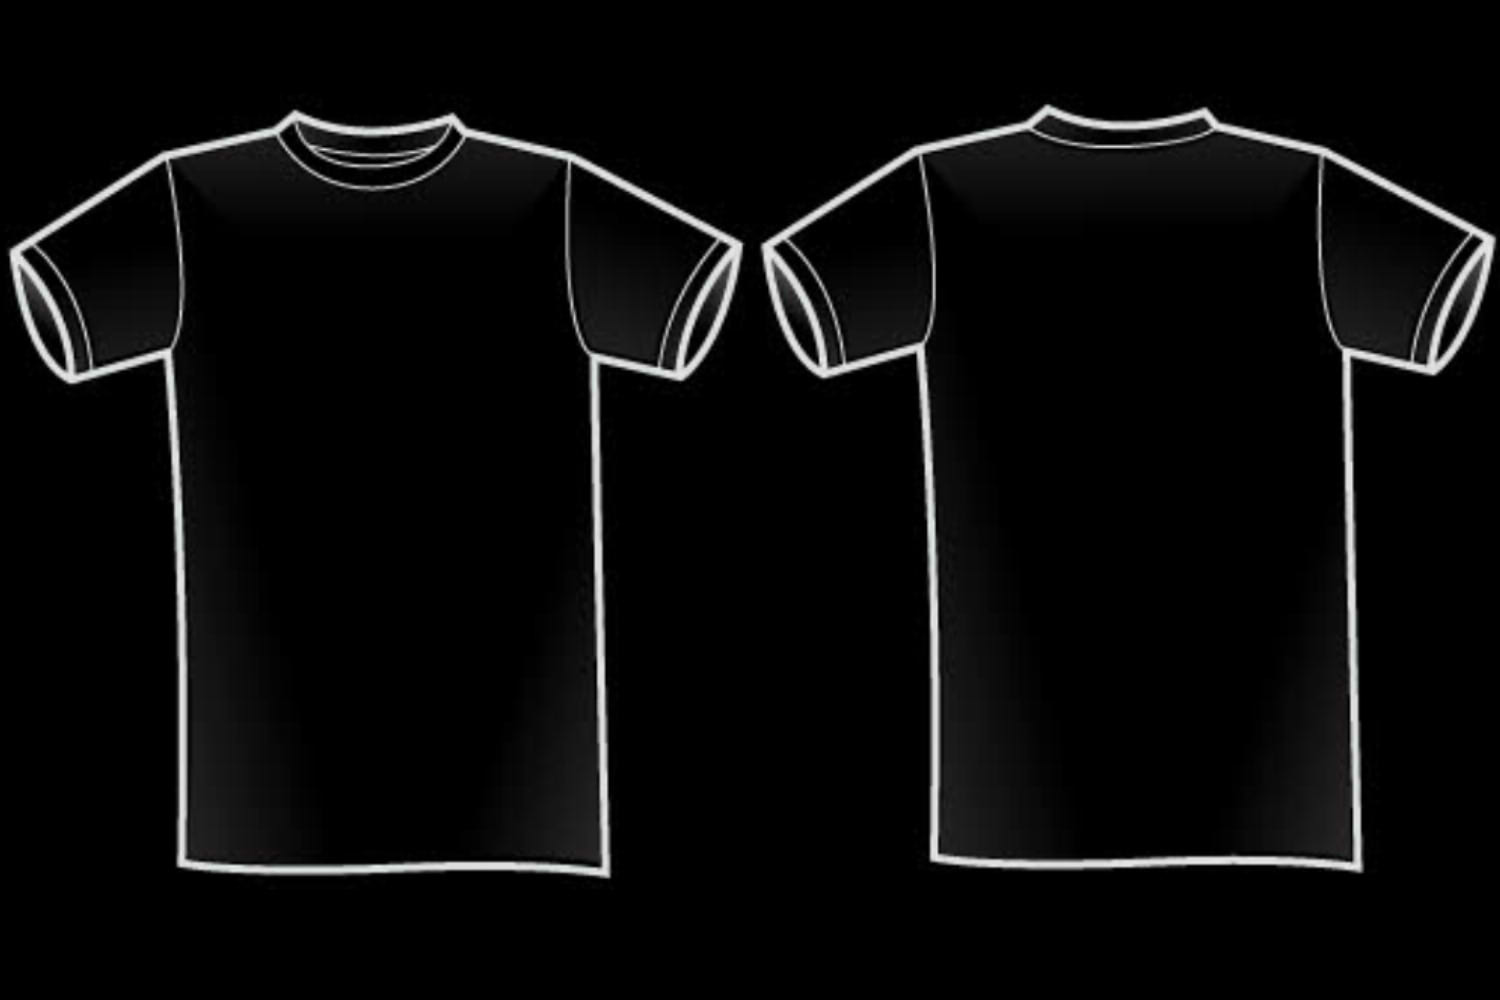 buy-black-t-shirt-front-and-back-53-off